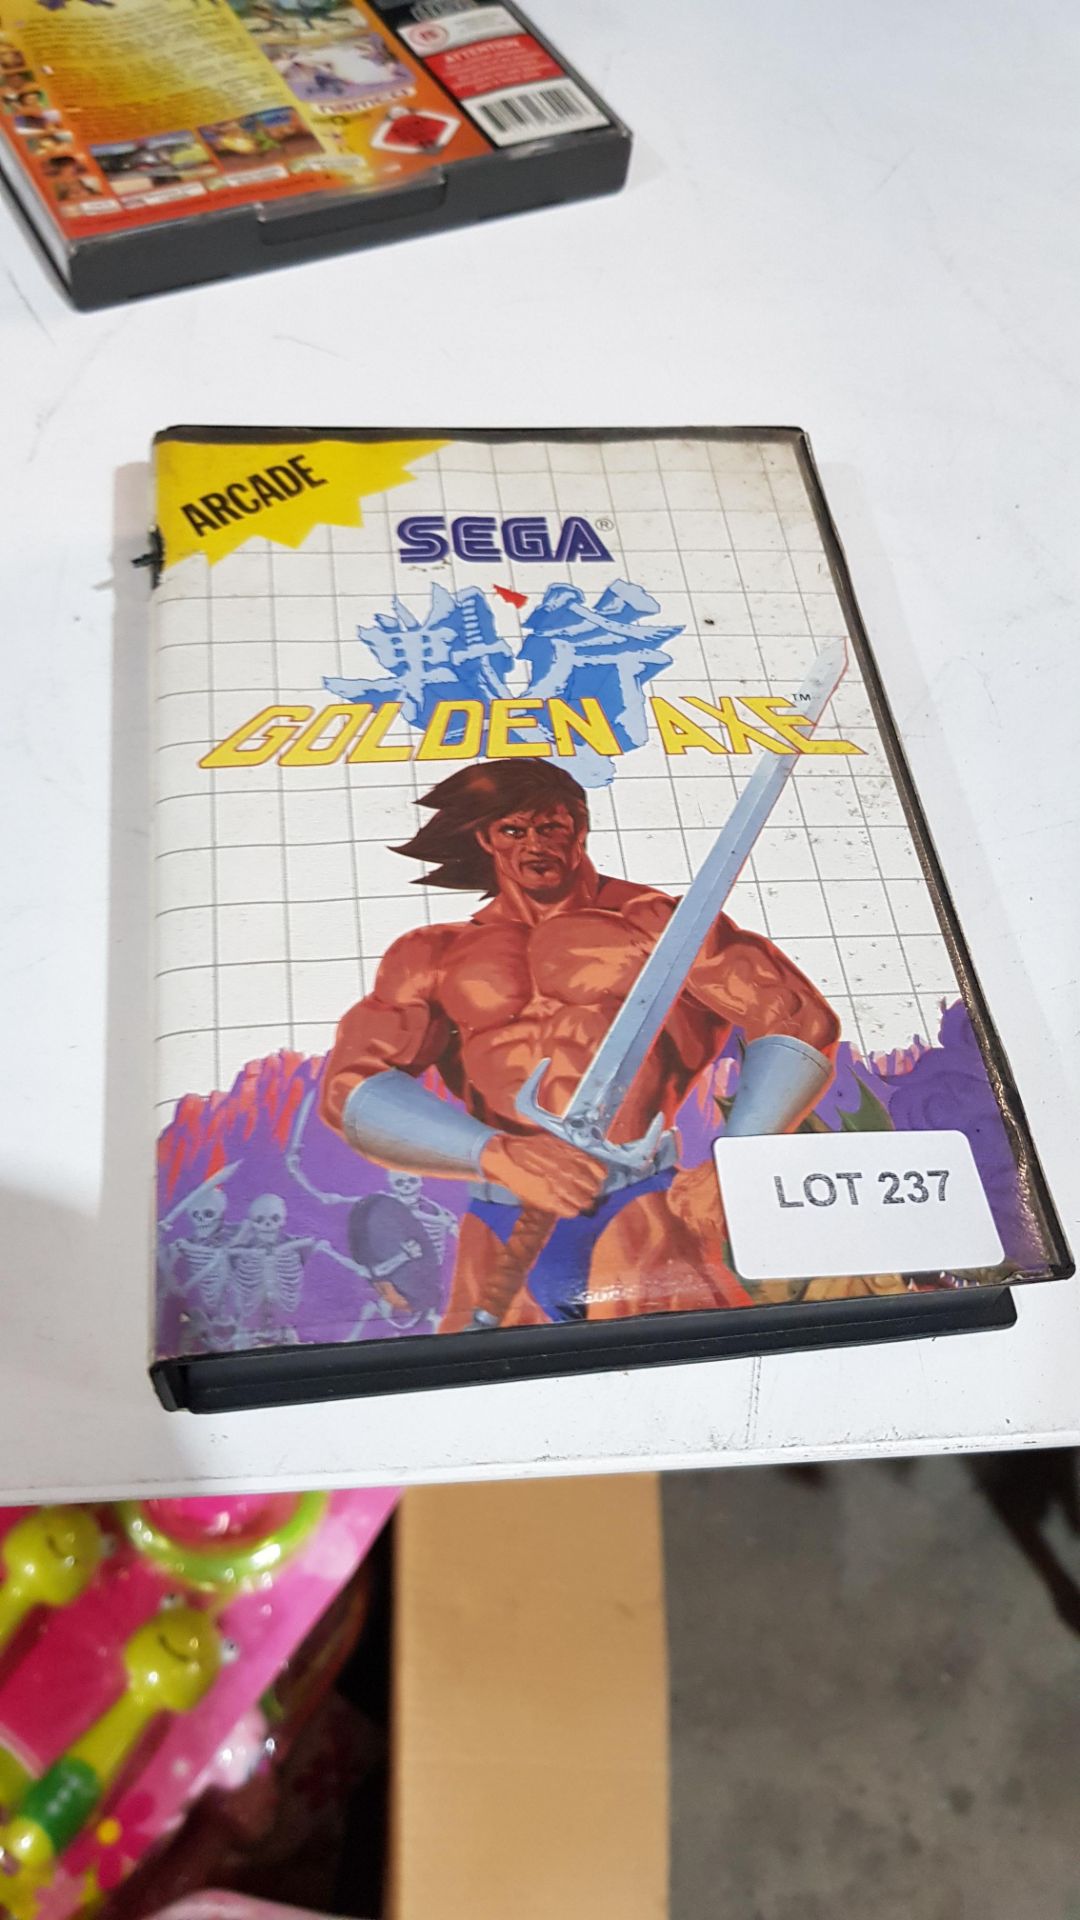 (R15C) Retro Gaming. 3 Items. 1 X Golden Axe Sega Master System, 1 X Soulblade PS1 Game (No Front - Image 4 of 7